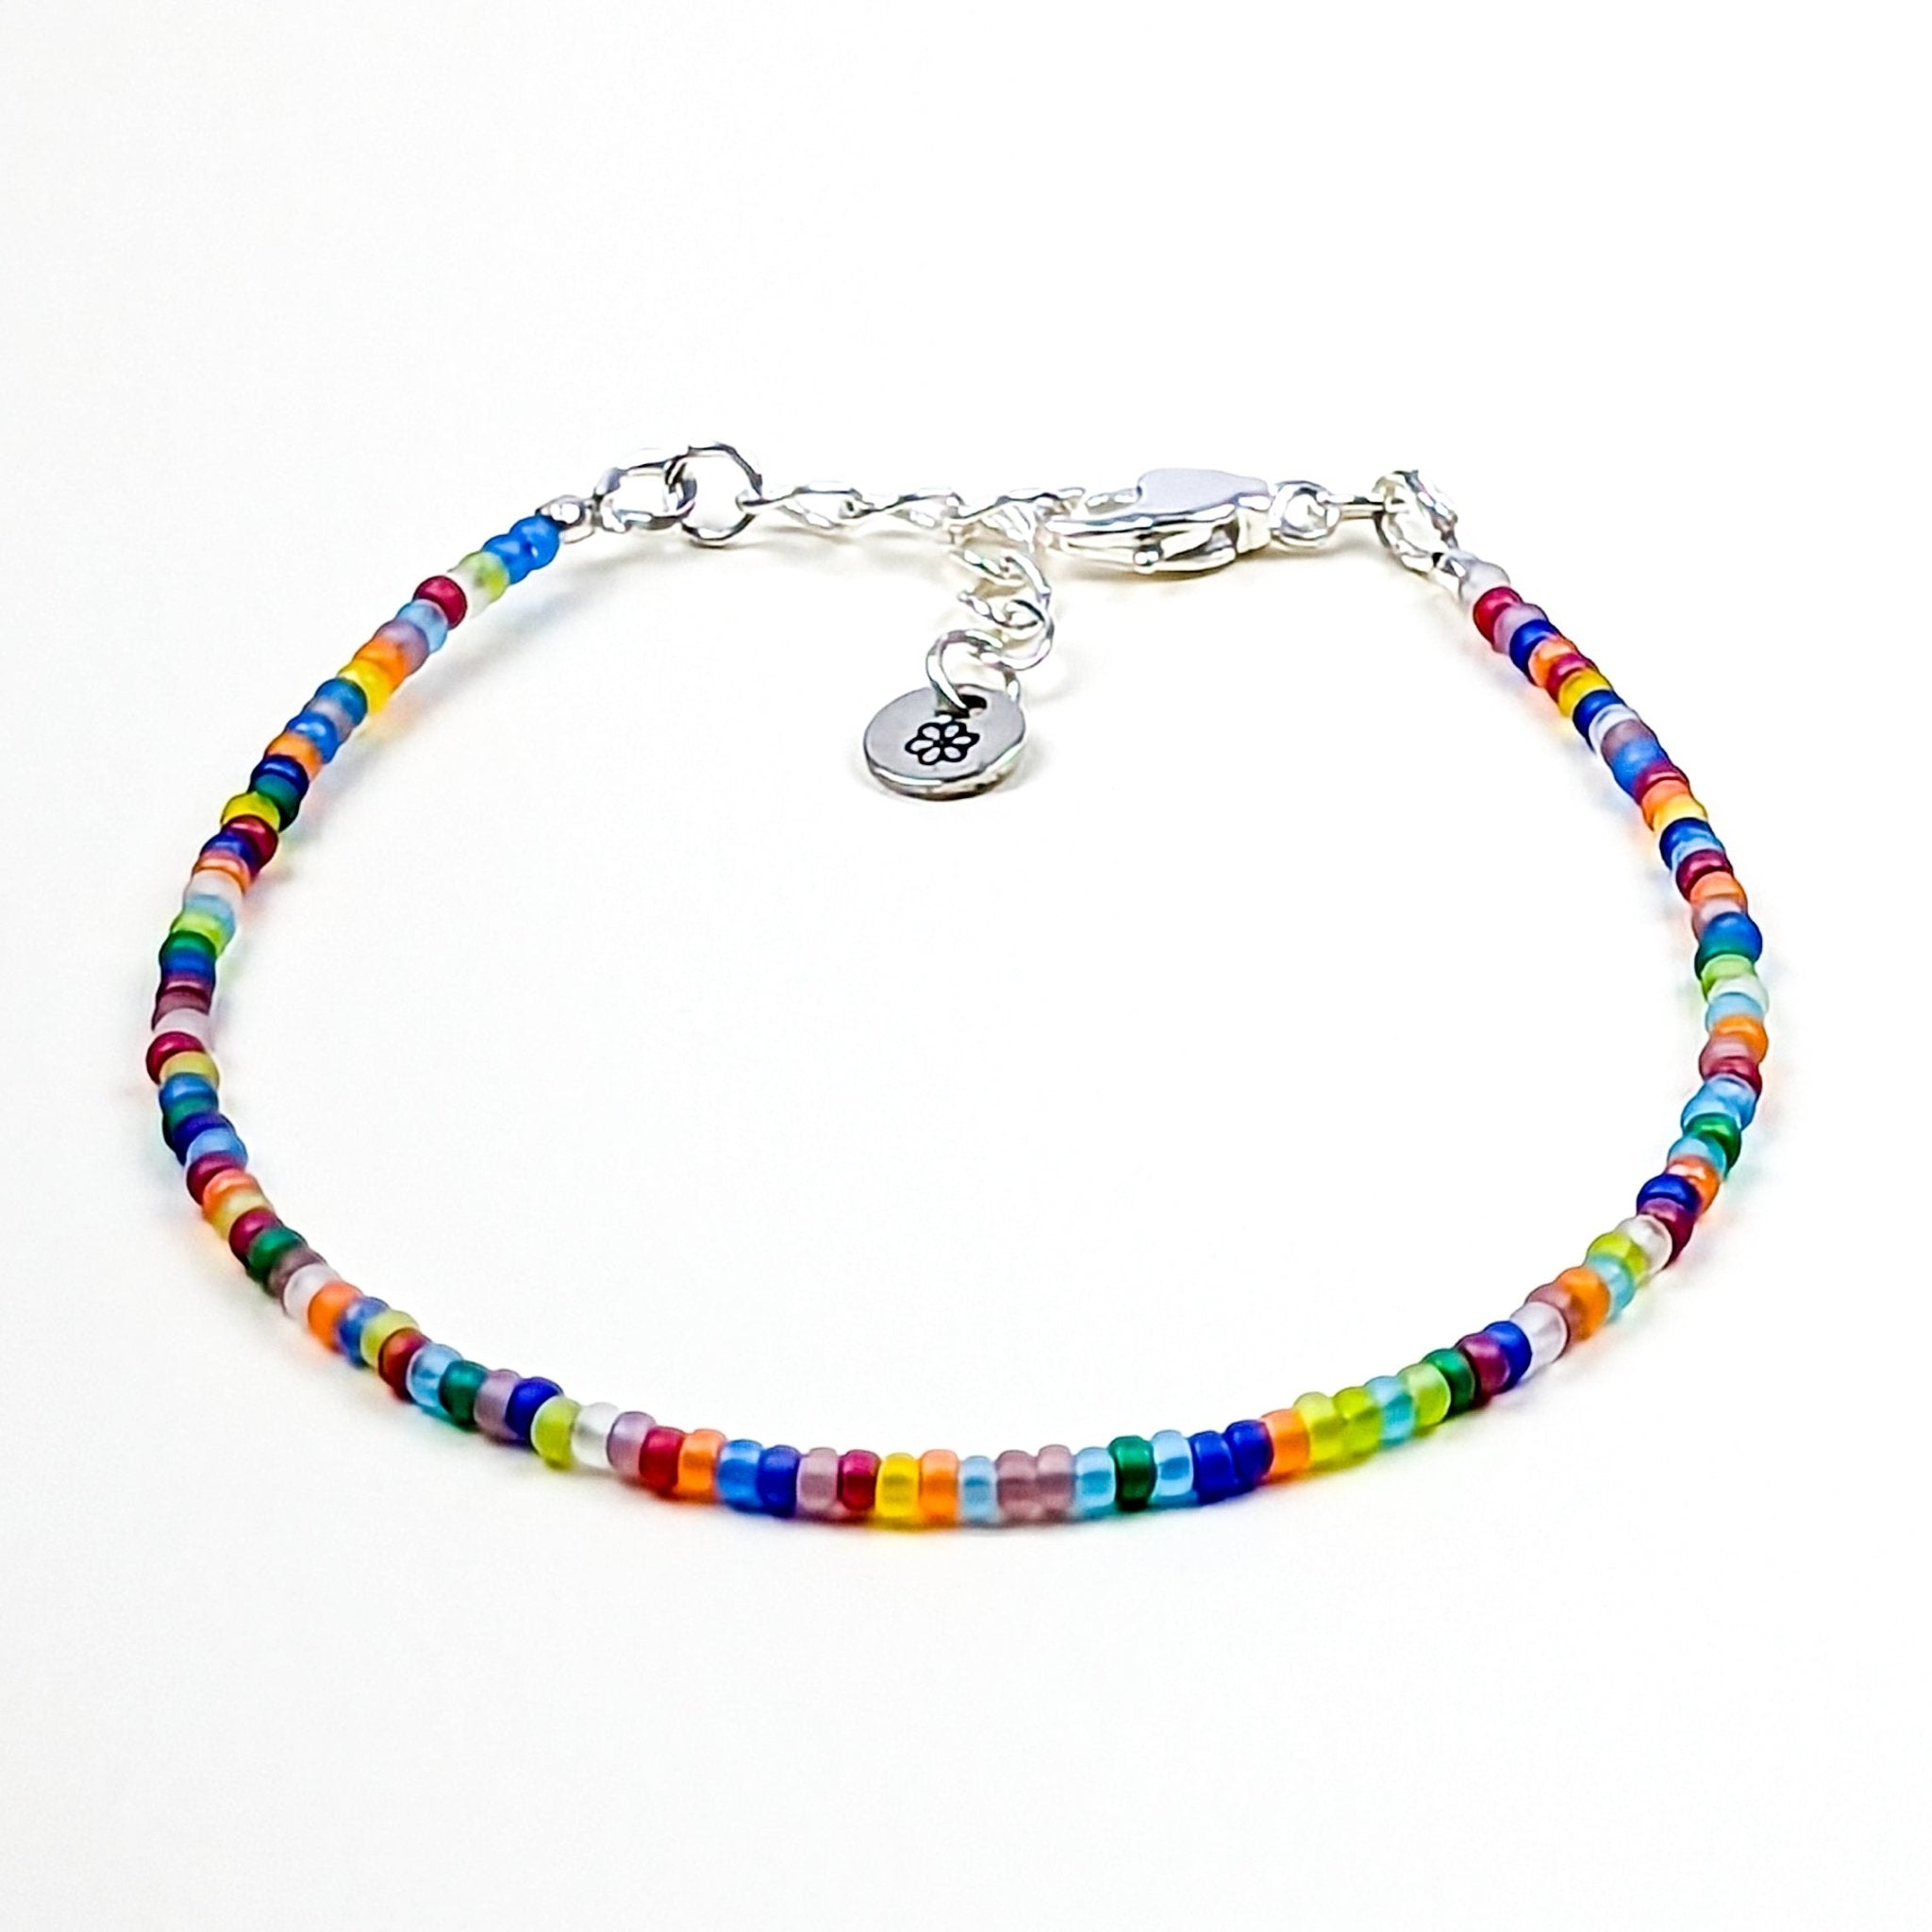 creations by cherie | Colorful & fun handmade beaded jewelry for women